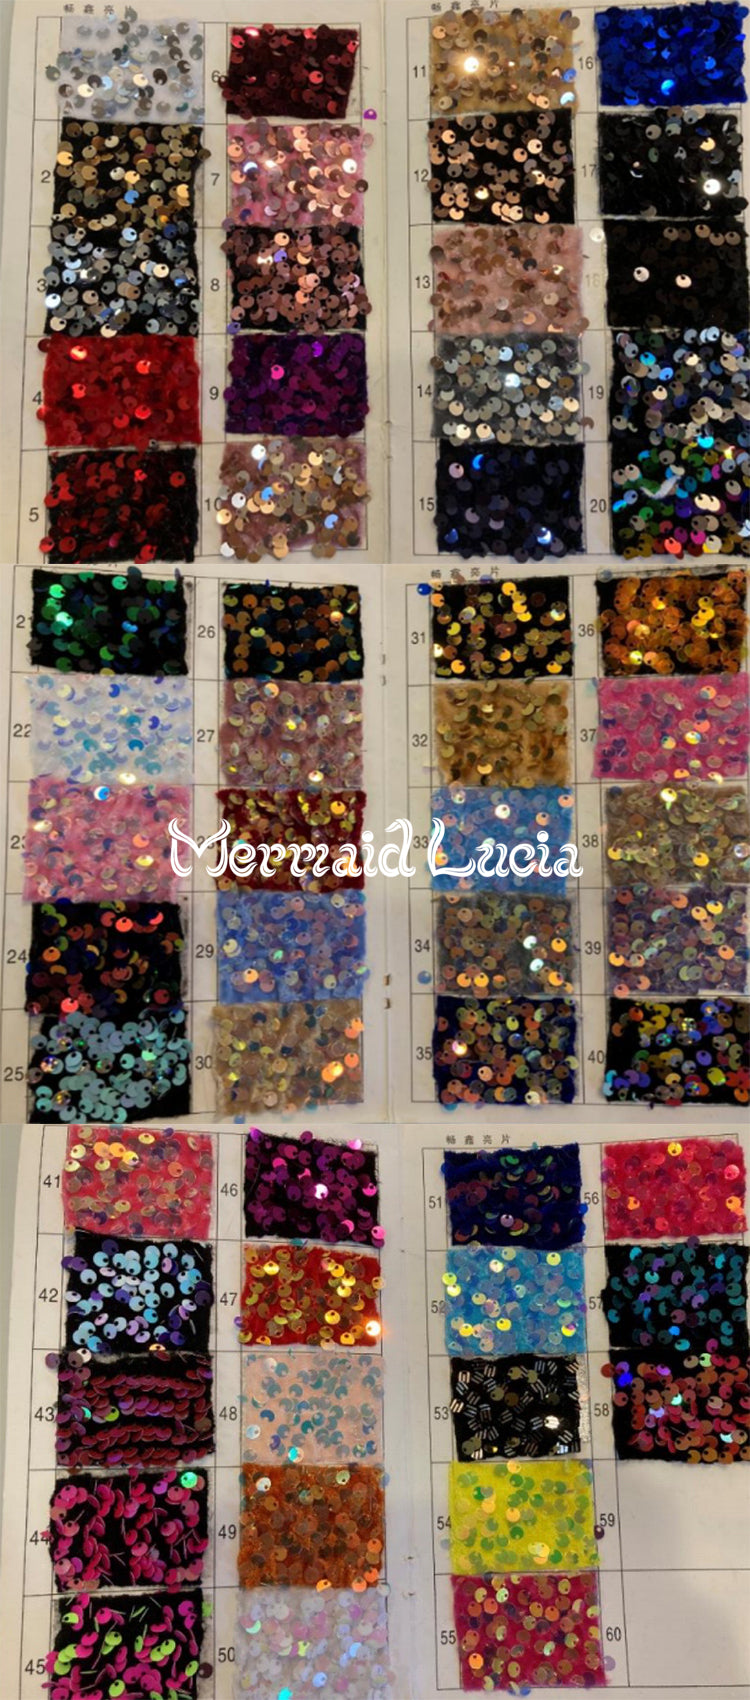 Mermaid Small Sequin Tail Color 12 Rose Pink